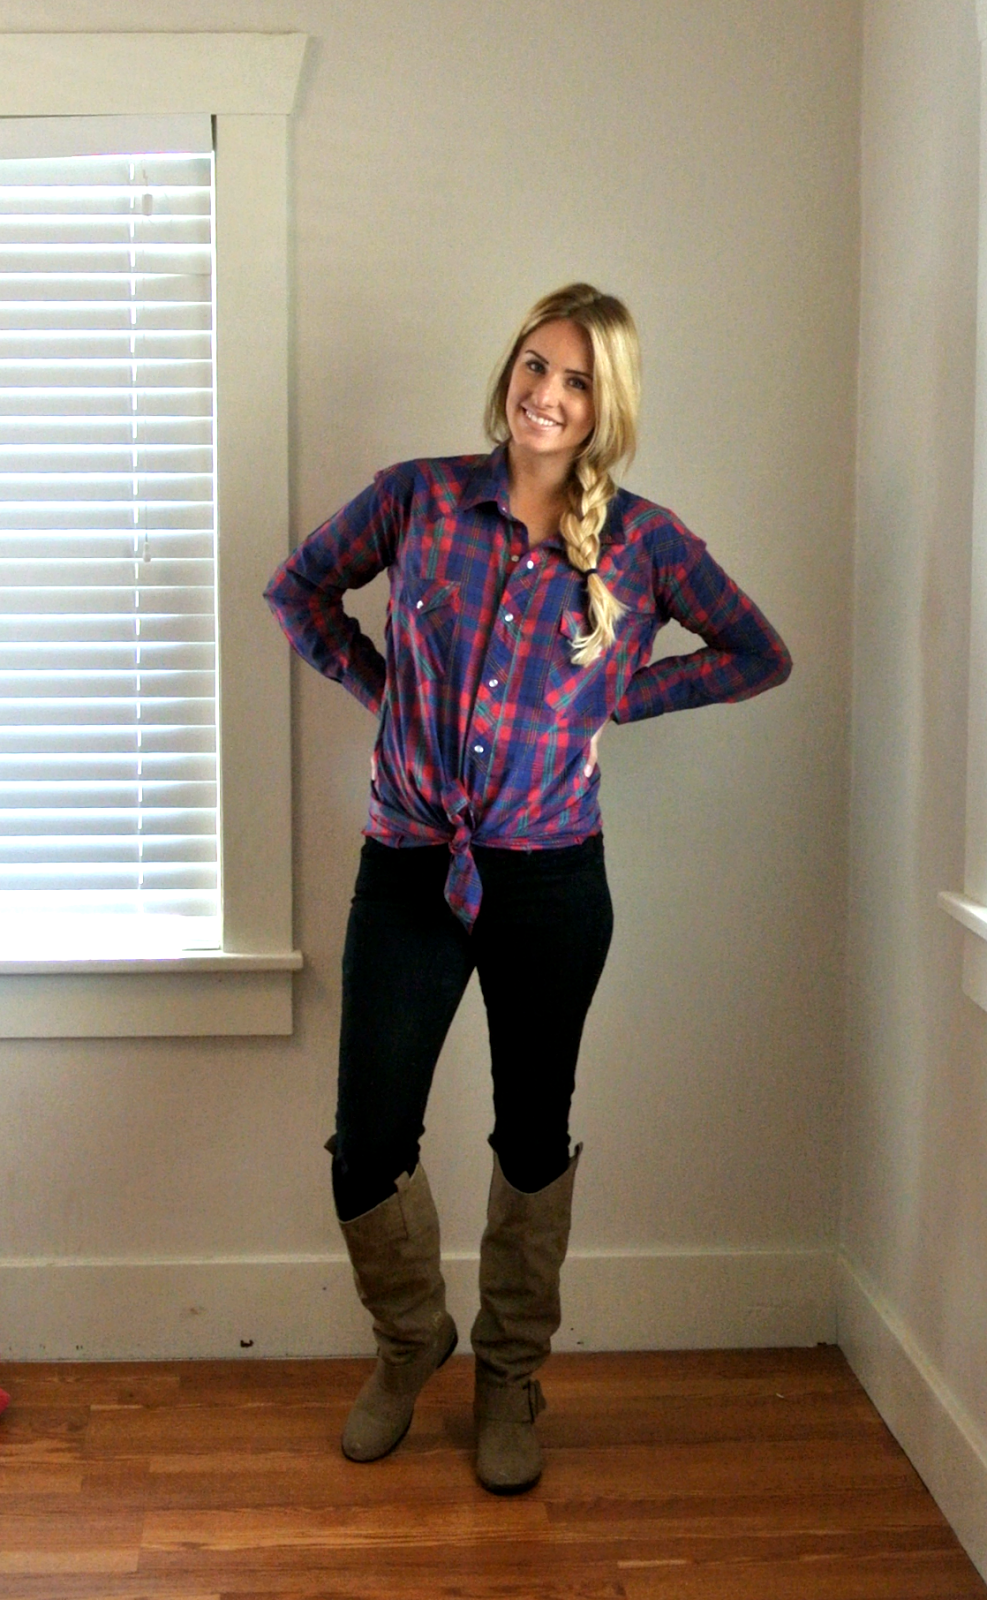 Taking in Large Sleeves the Quick and Easy Way - Kara Metta